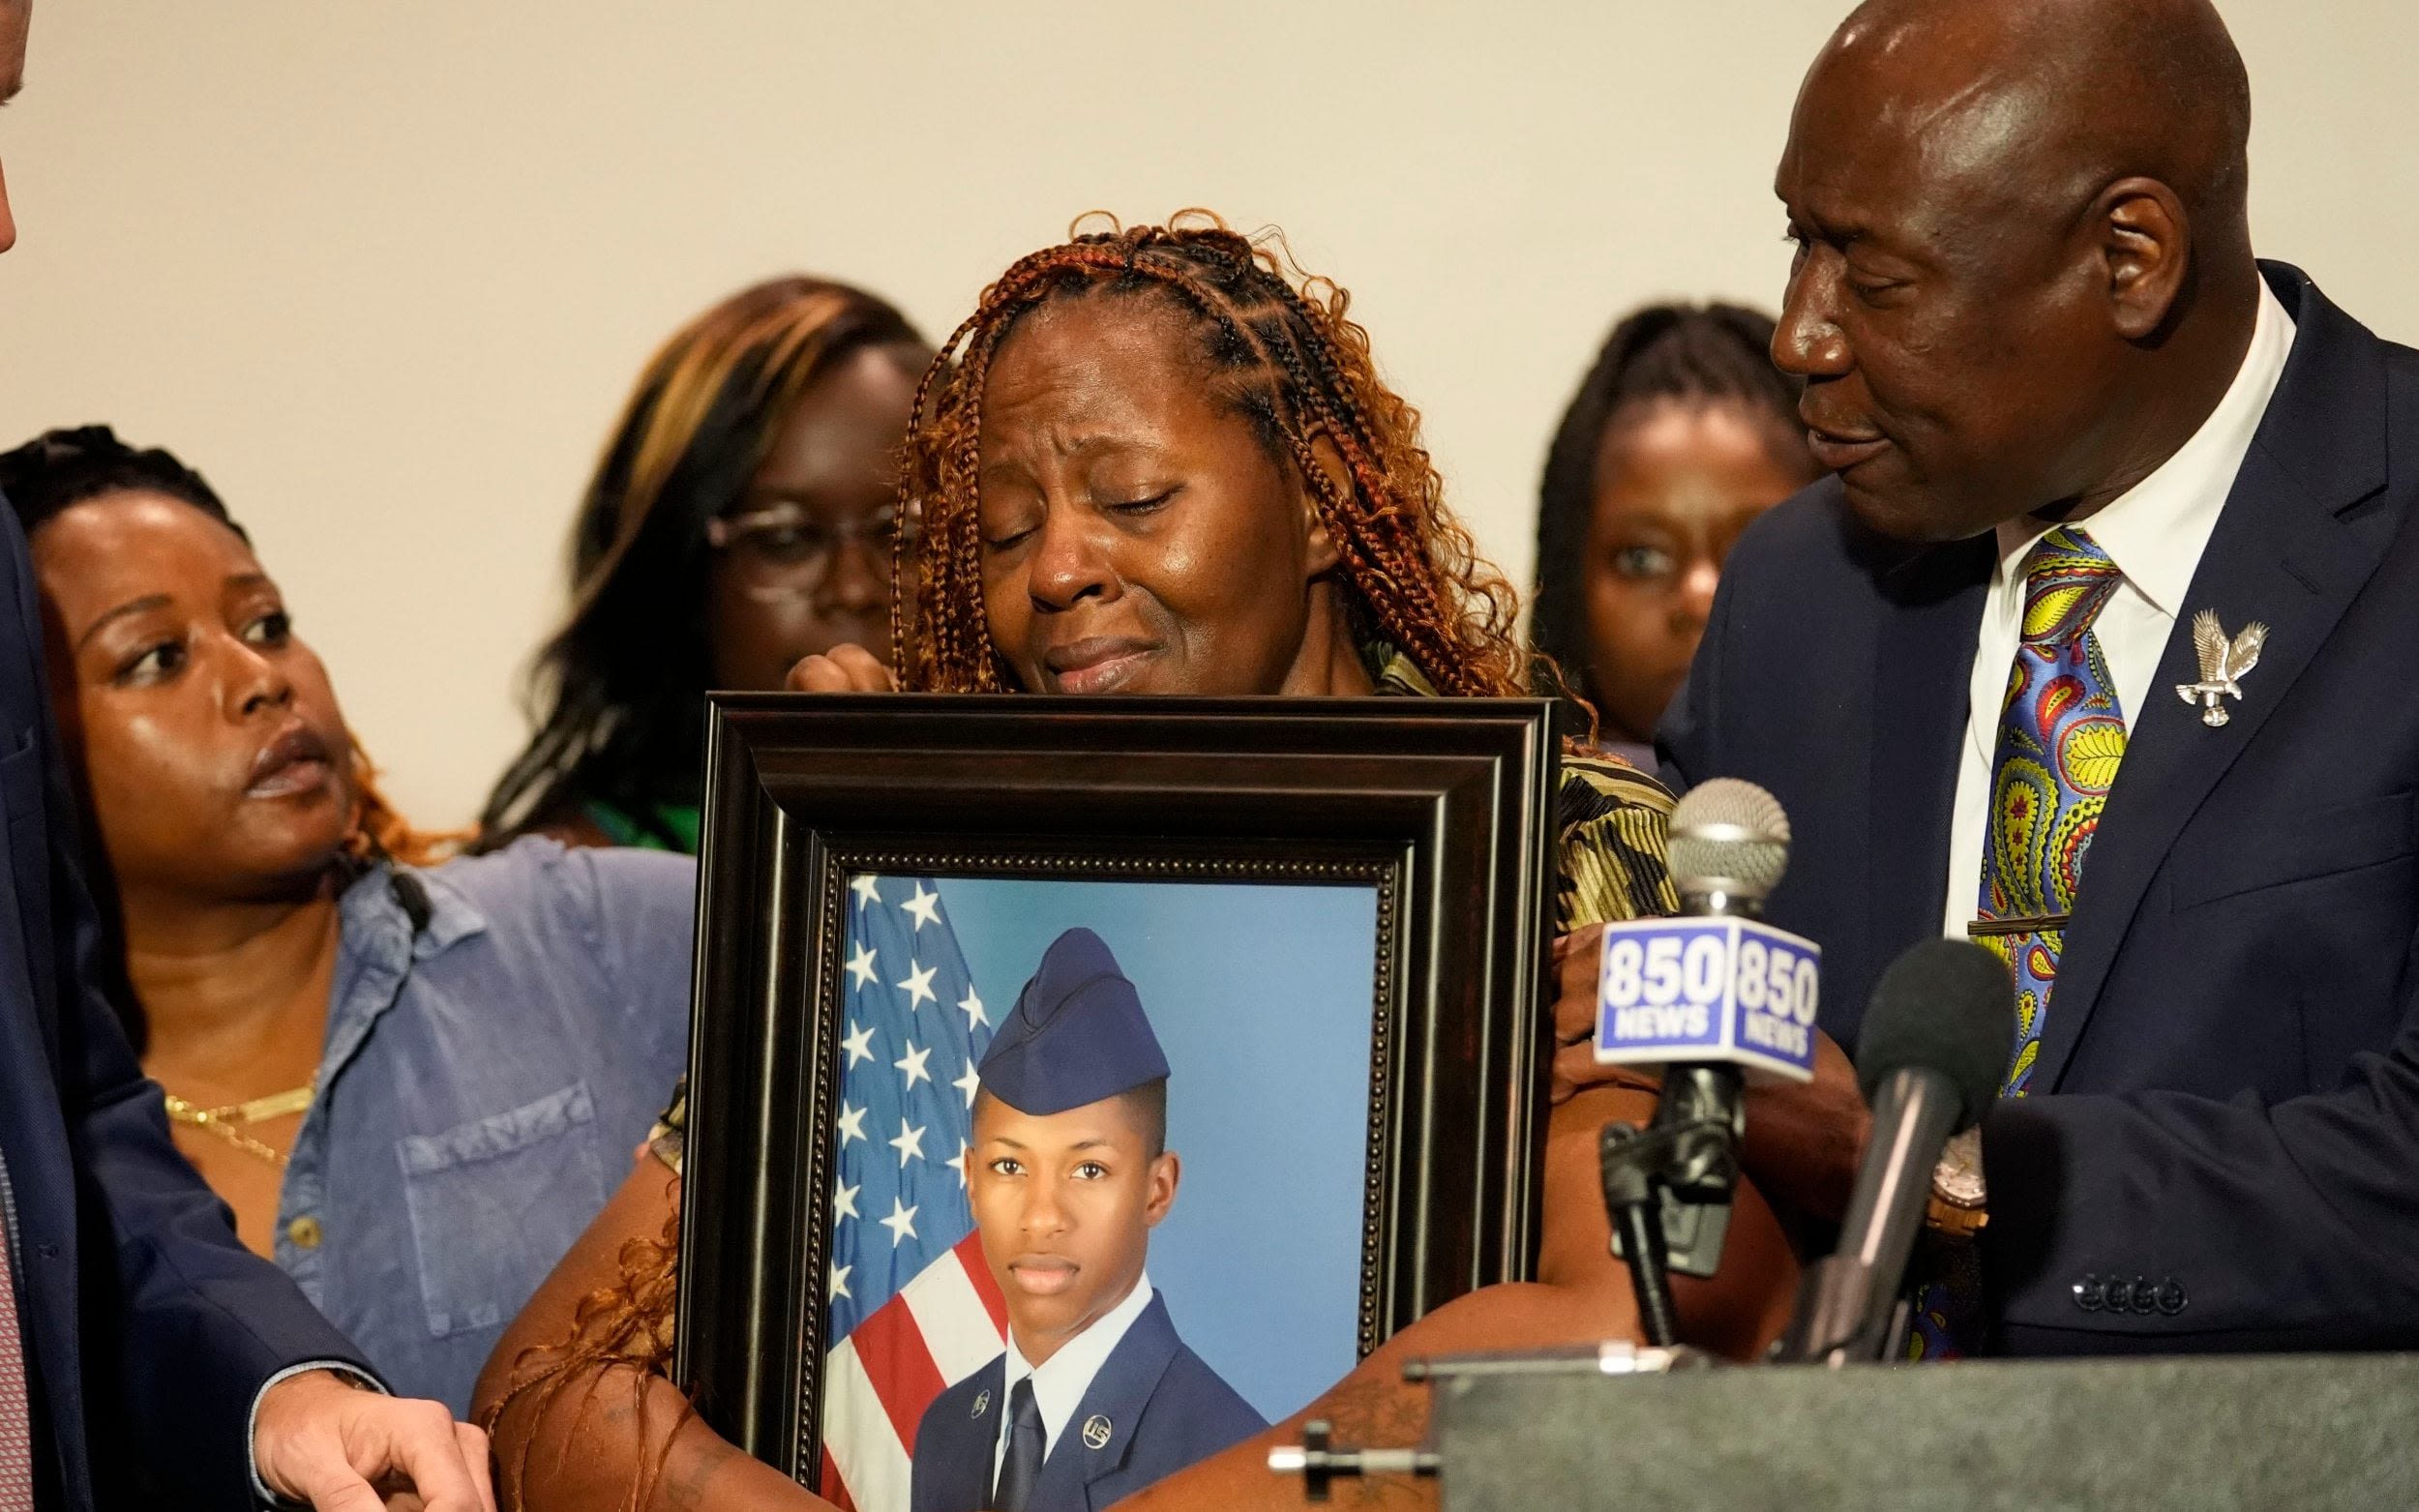 Airman shot dead after answering door to sheriff who got wrong apartment